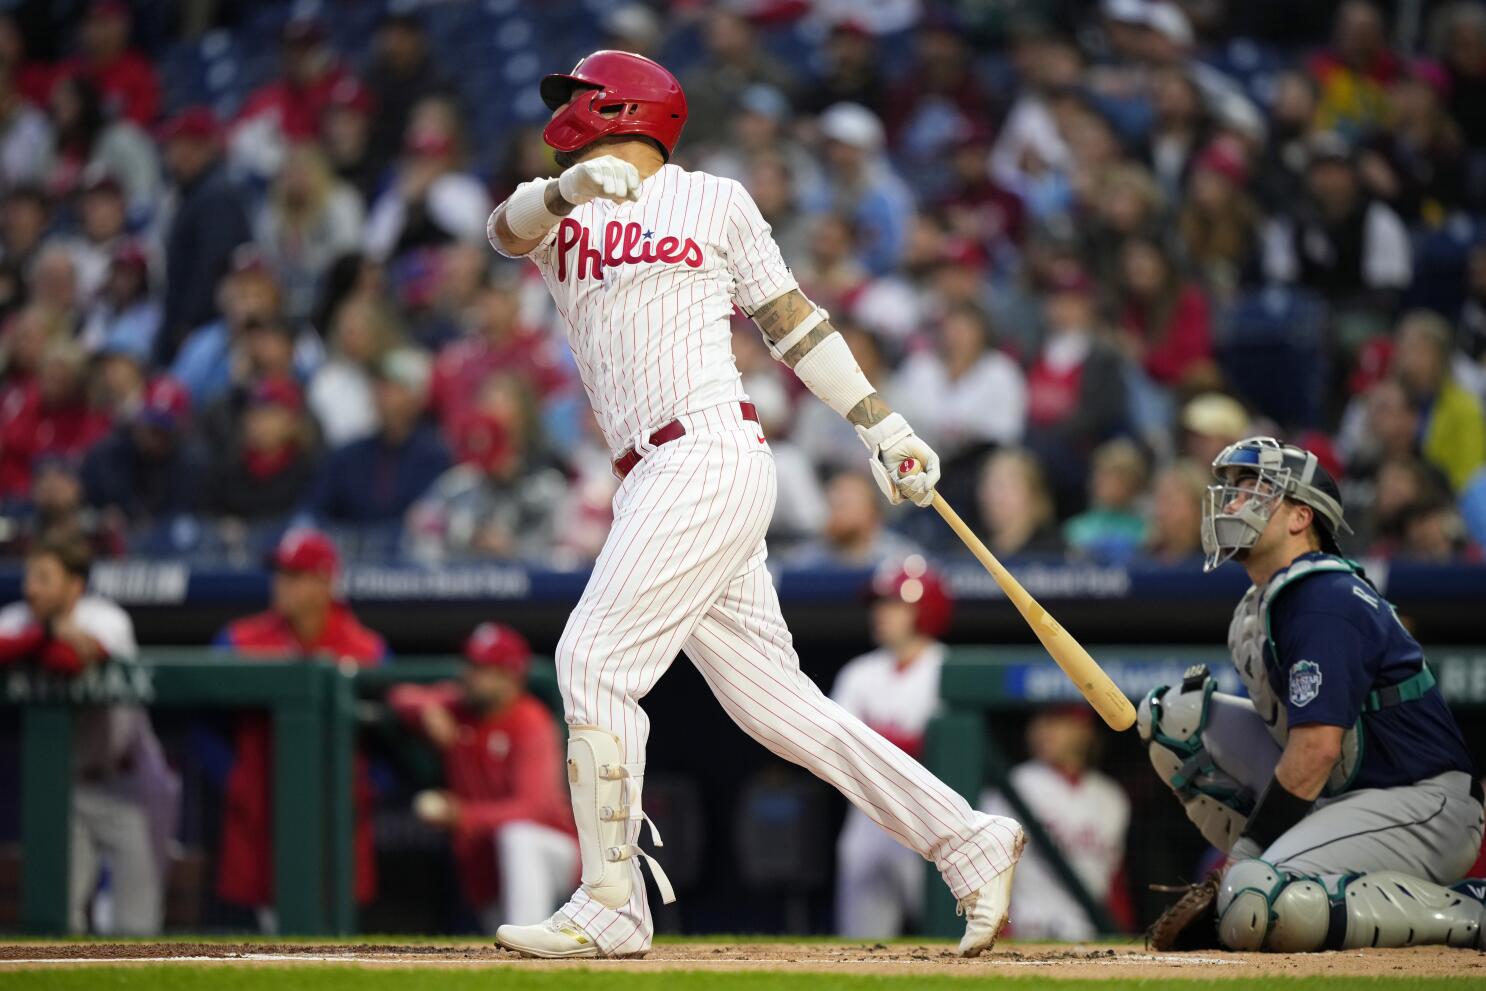 Phillies hot as World Series rematch against Astros looms - The